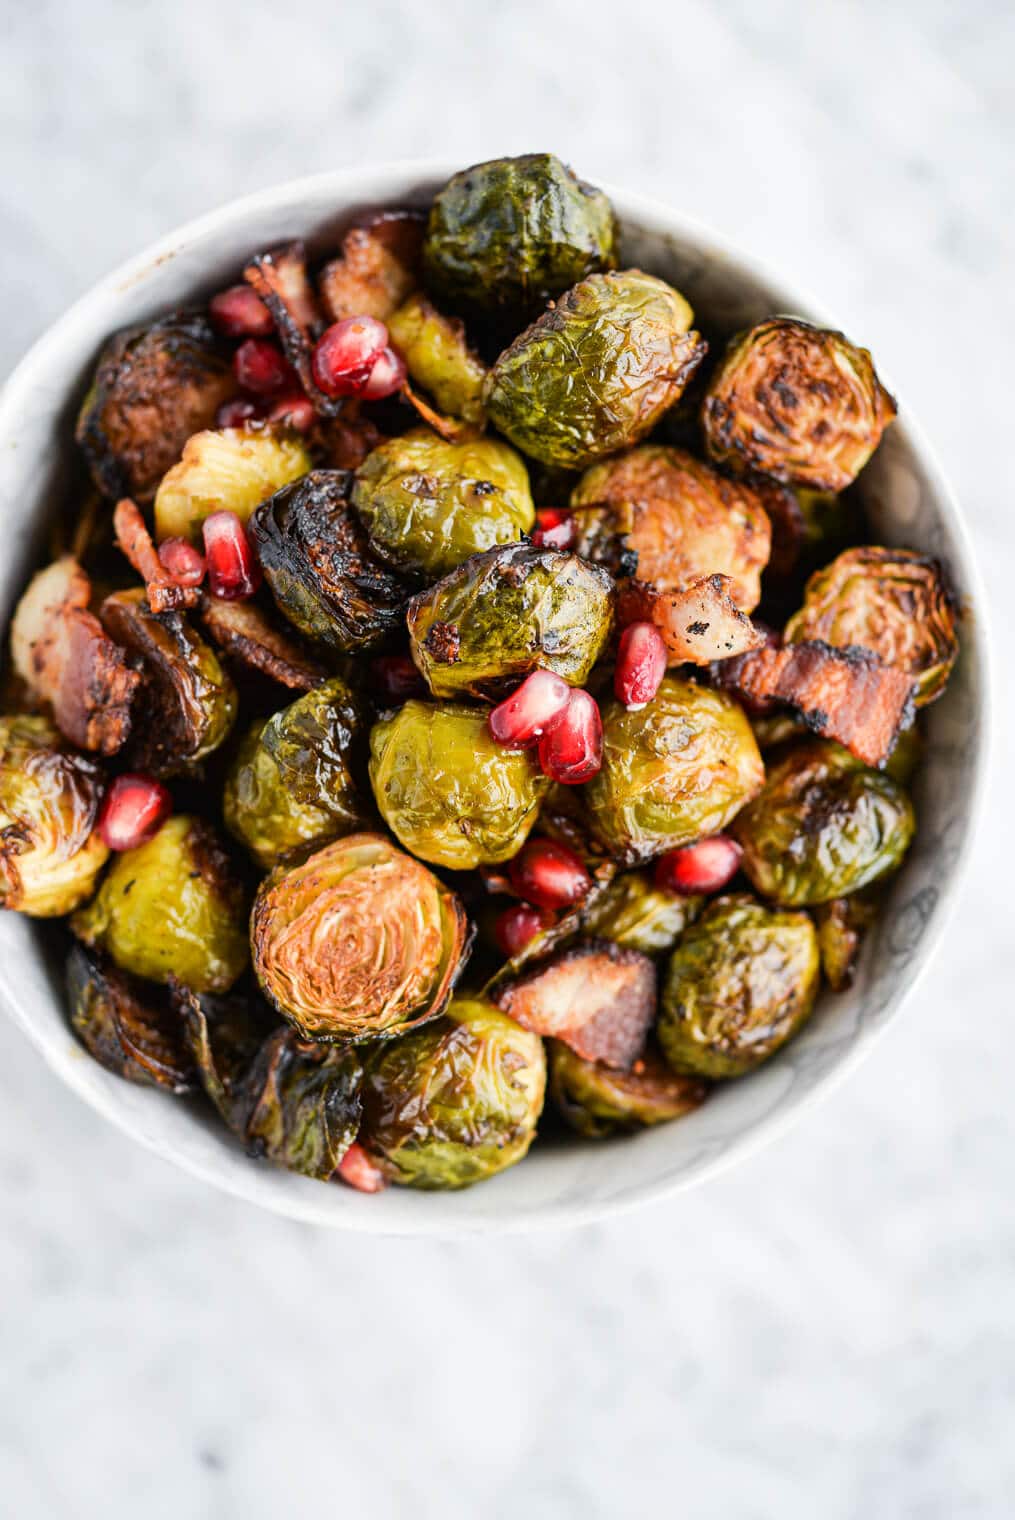 top view of a bowl of roasted brussels sprouts, pomegranate seeds, and bacon in a marble bowl on a marble surface